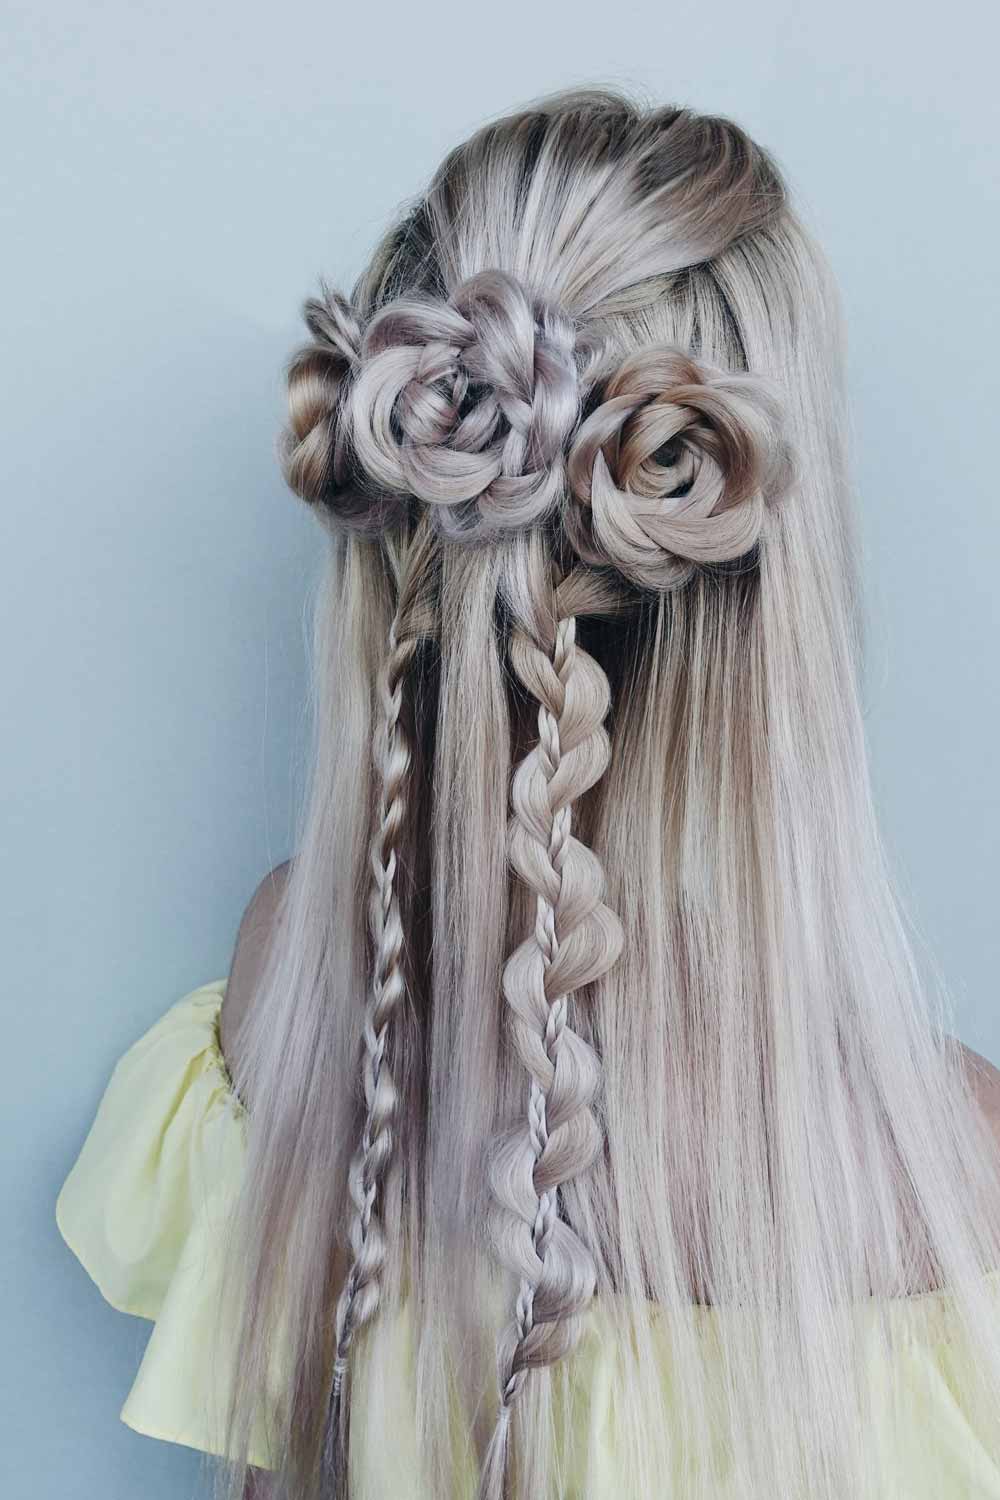 Half Up Half Down Hairstyle with Rose Braids